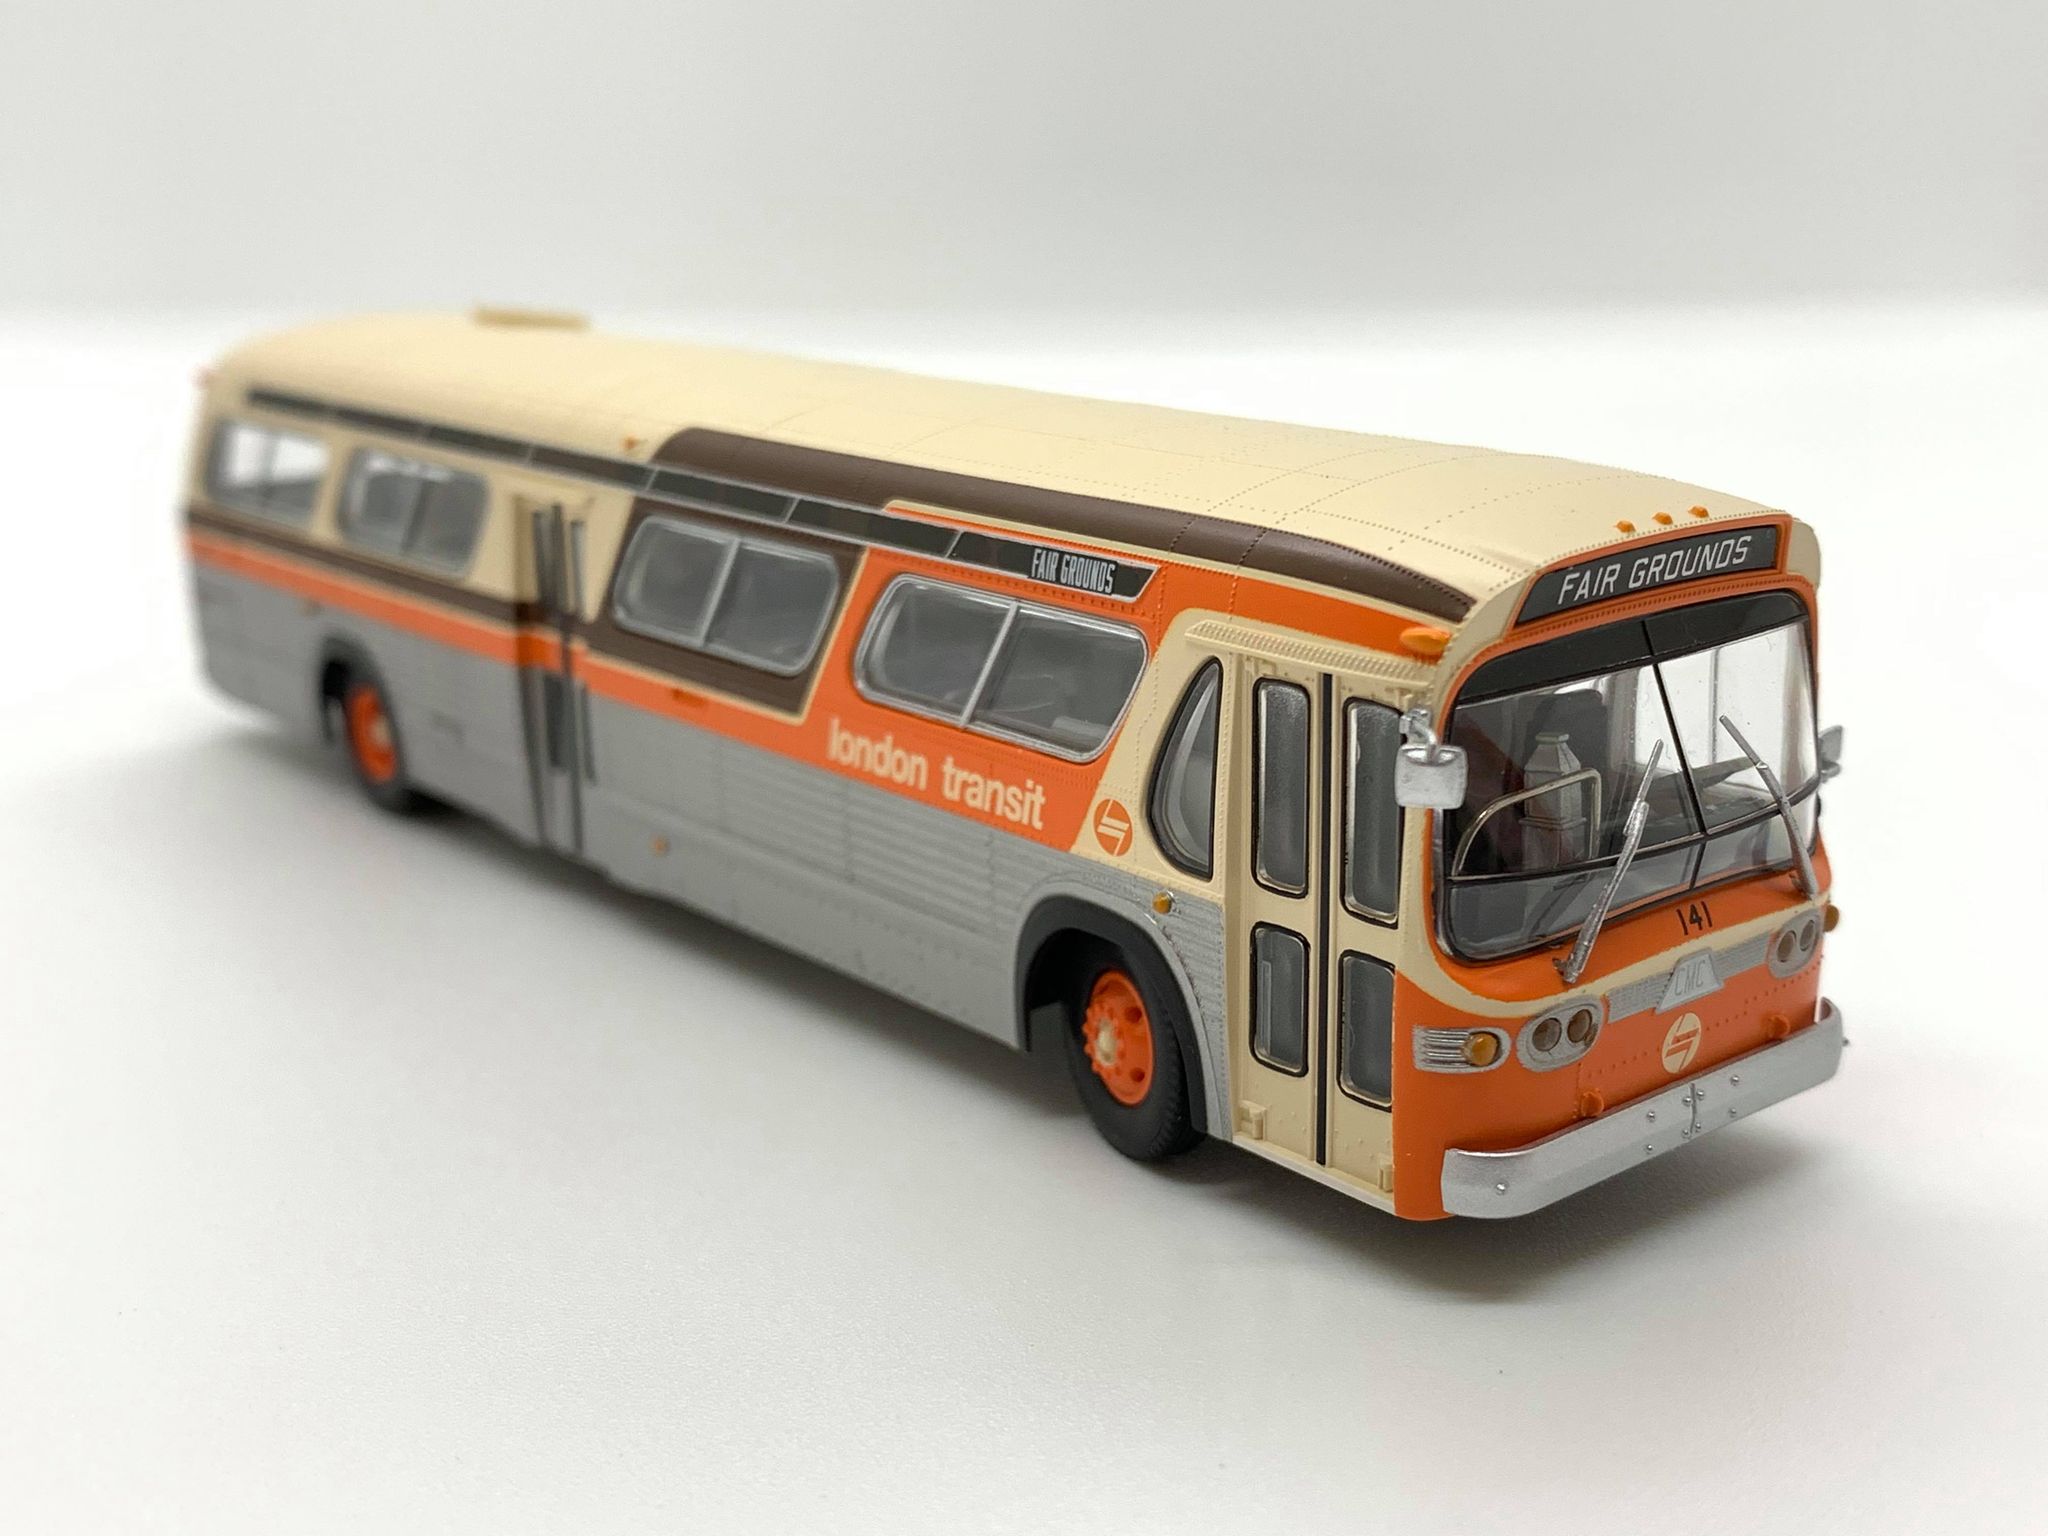 Rapido Trains 753097 HO New Look Bus Exclusive London Transit Commission (Orange/Brown)#141 Fair Grounds Deluxe